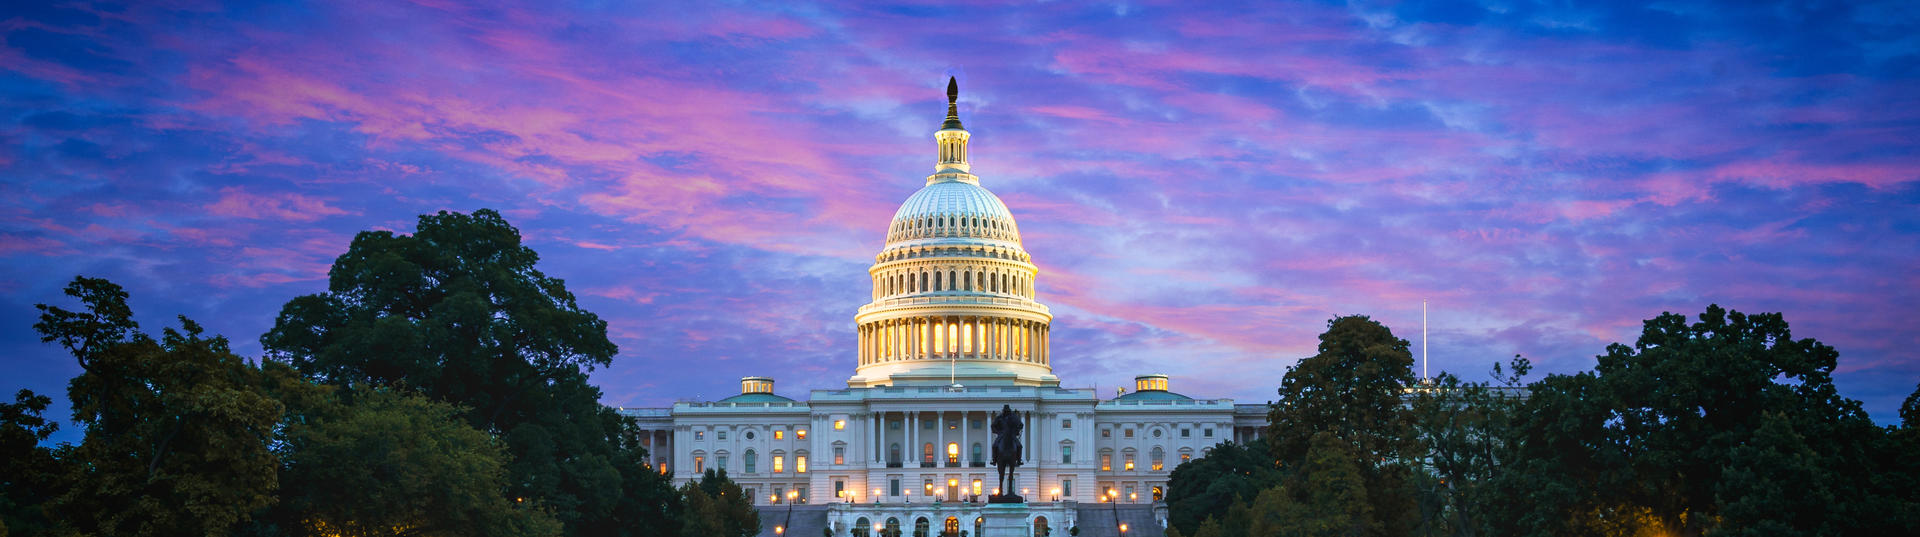 Capitol building with colorful sunset behind